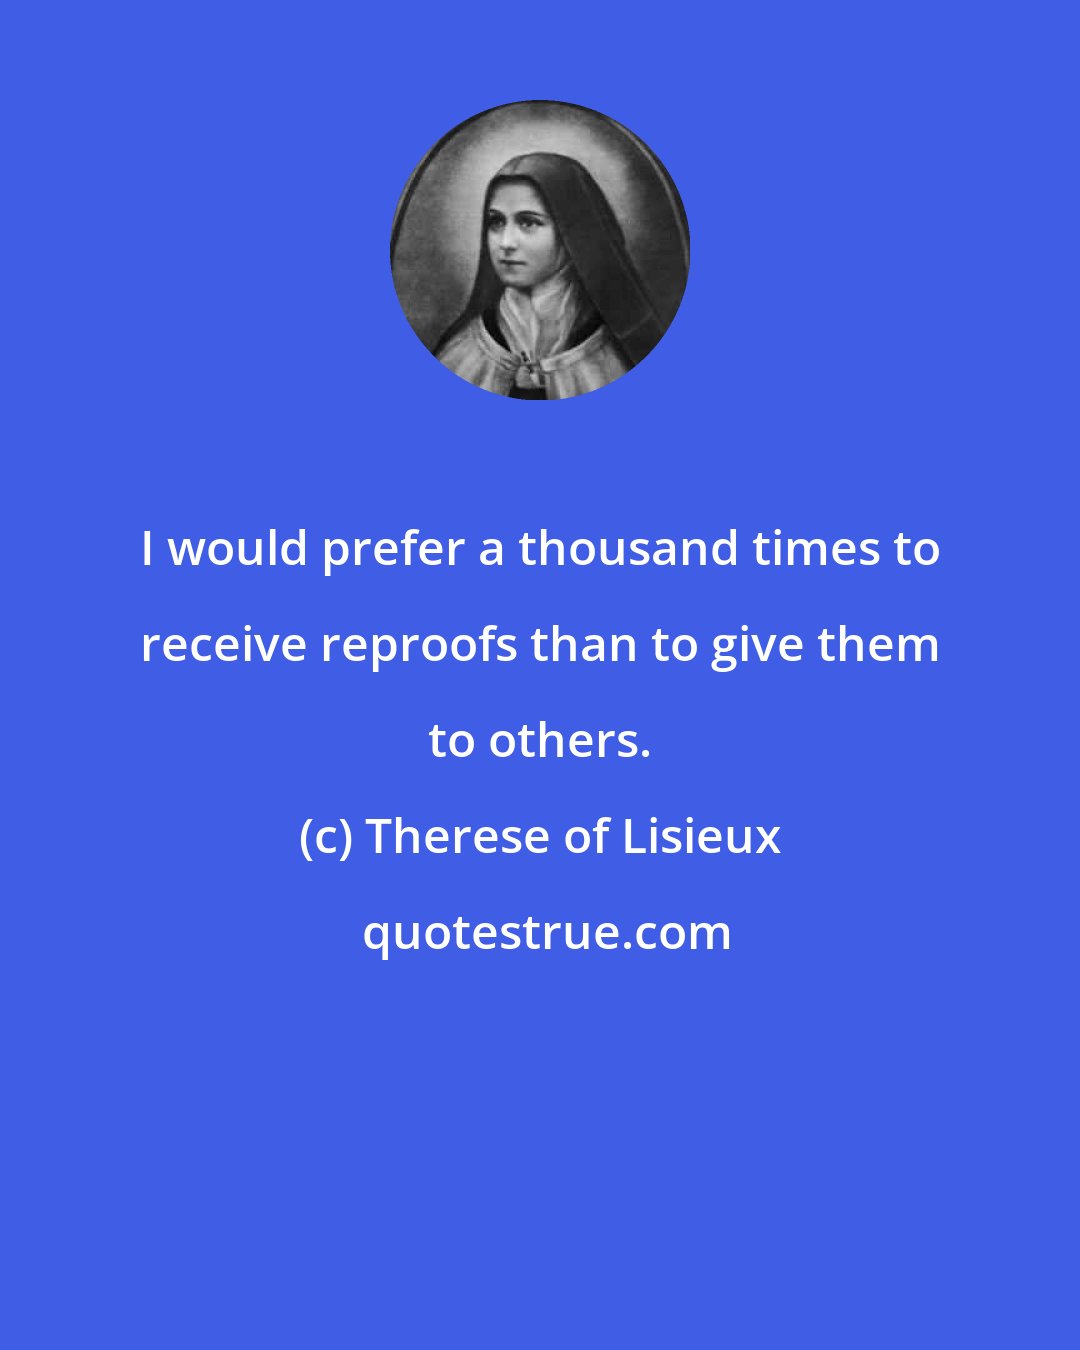 Therese of Lisieux: I would prefer a thousand times to receive reproofs than to give them to others.